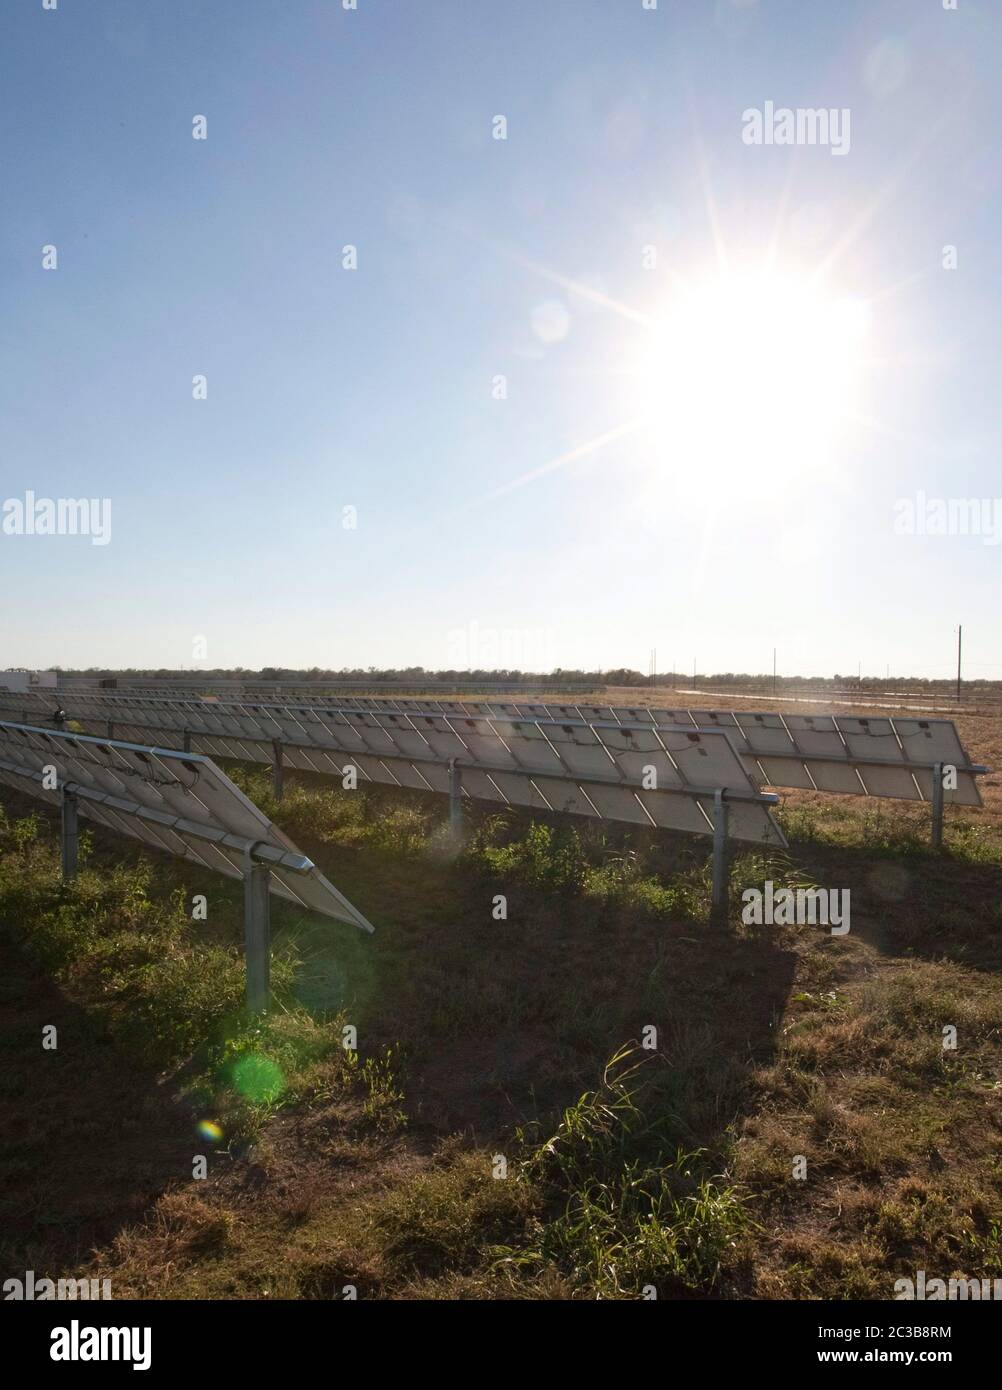 Manor Texas USA, 2012: Webberville Solar Farm, the largest active solar project of any public power utility in the country. It has over 127,000 modules and can generate more than 61 million kWh of electricity,  Texas - 2012. ©MKC / Daemmrich Photos Stock Photo